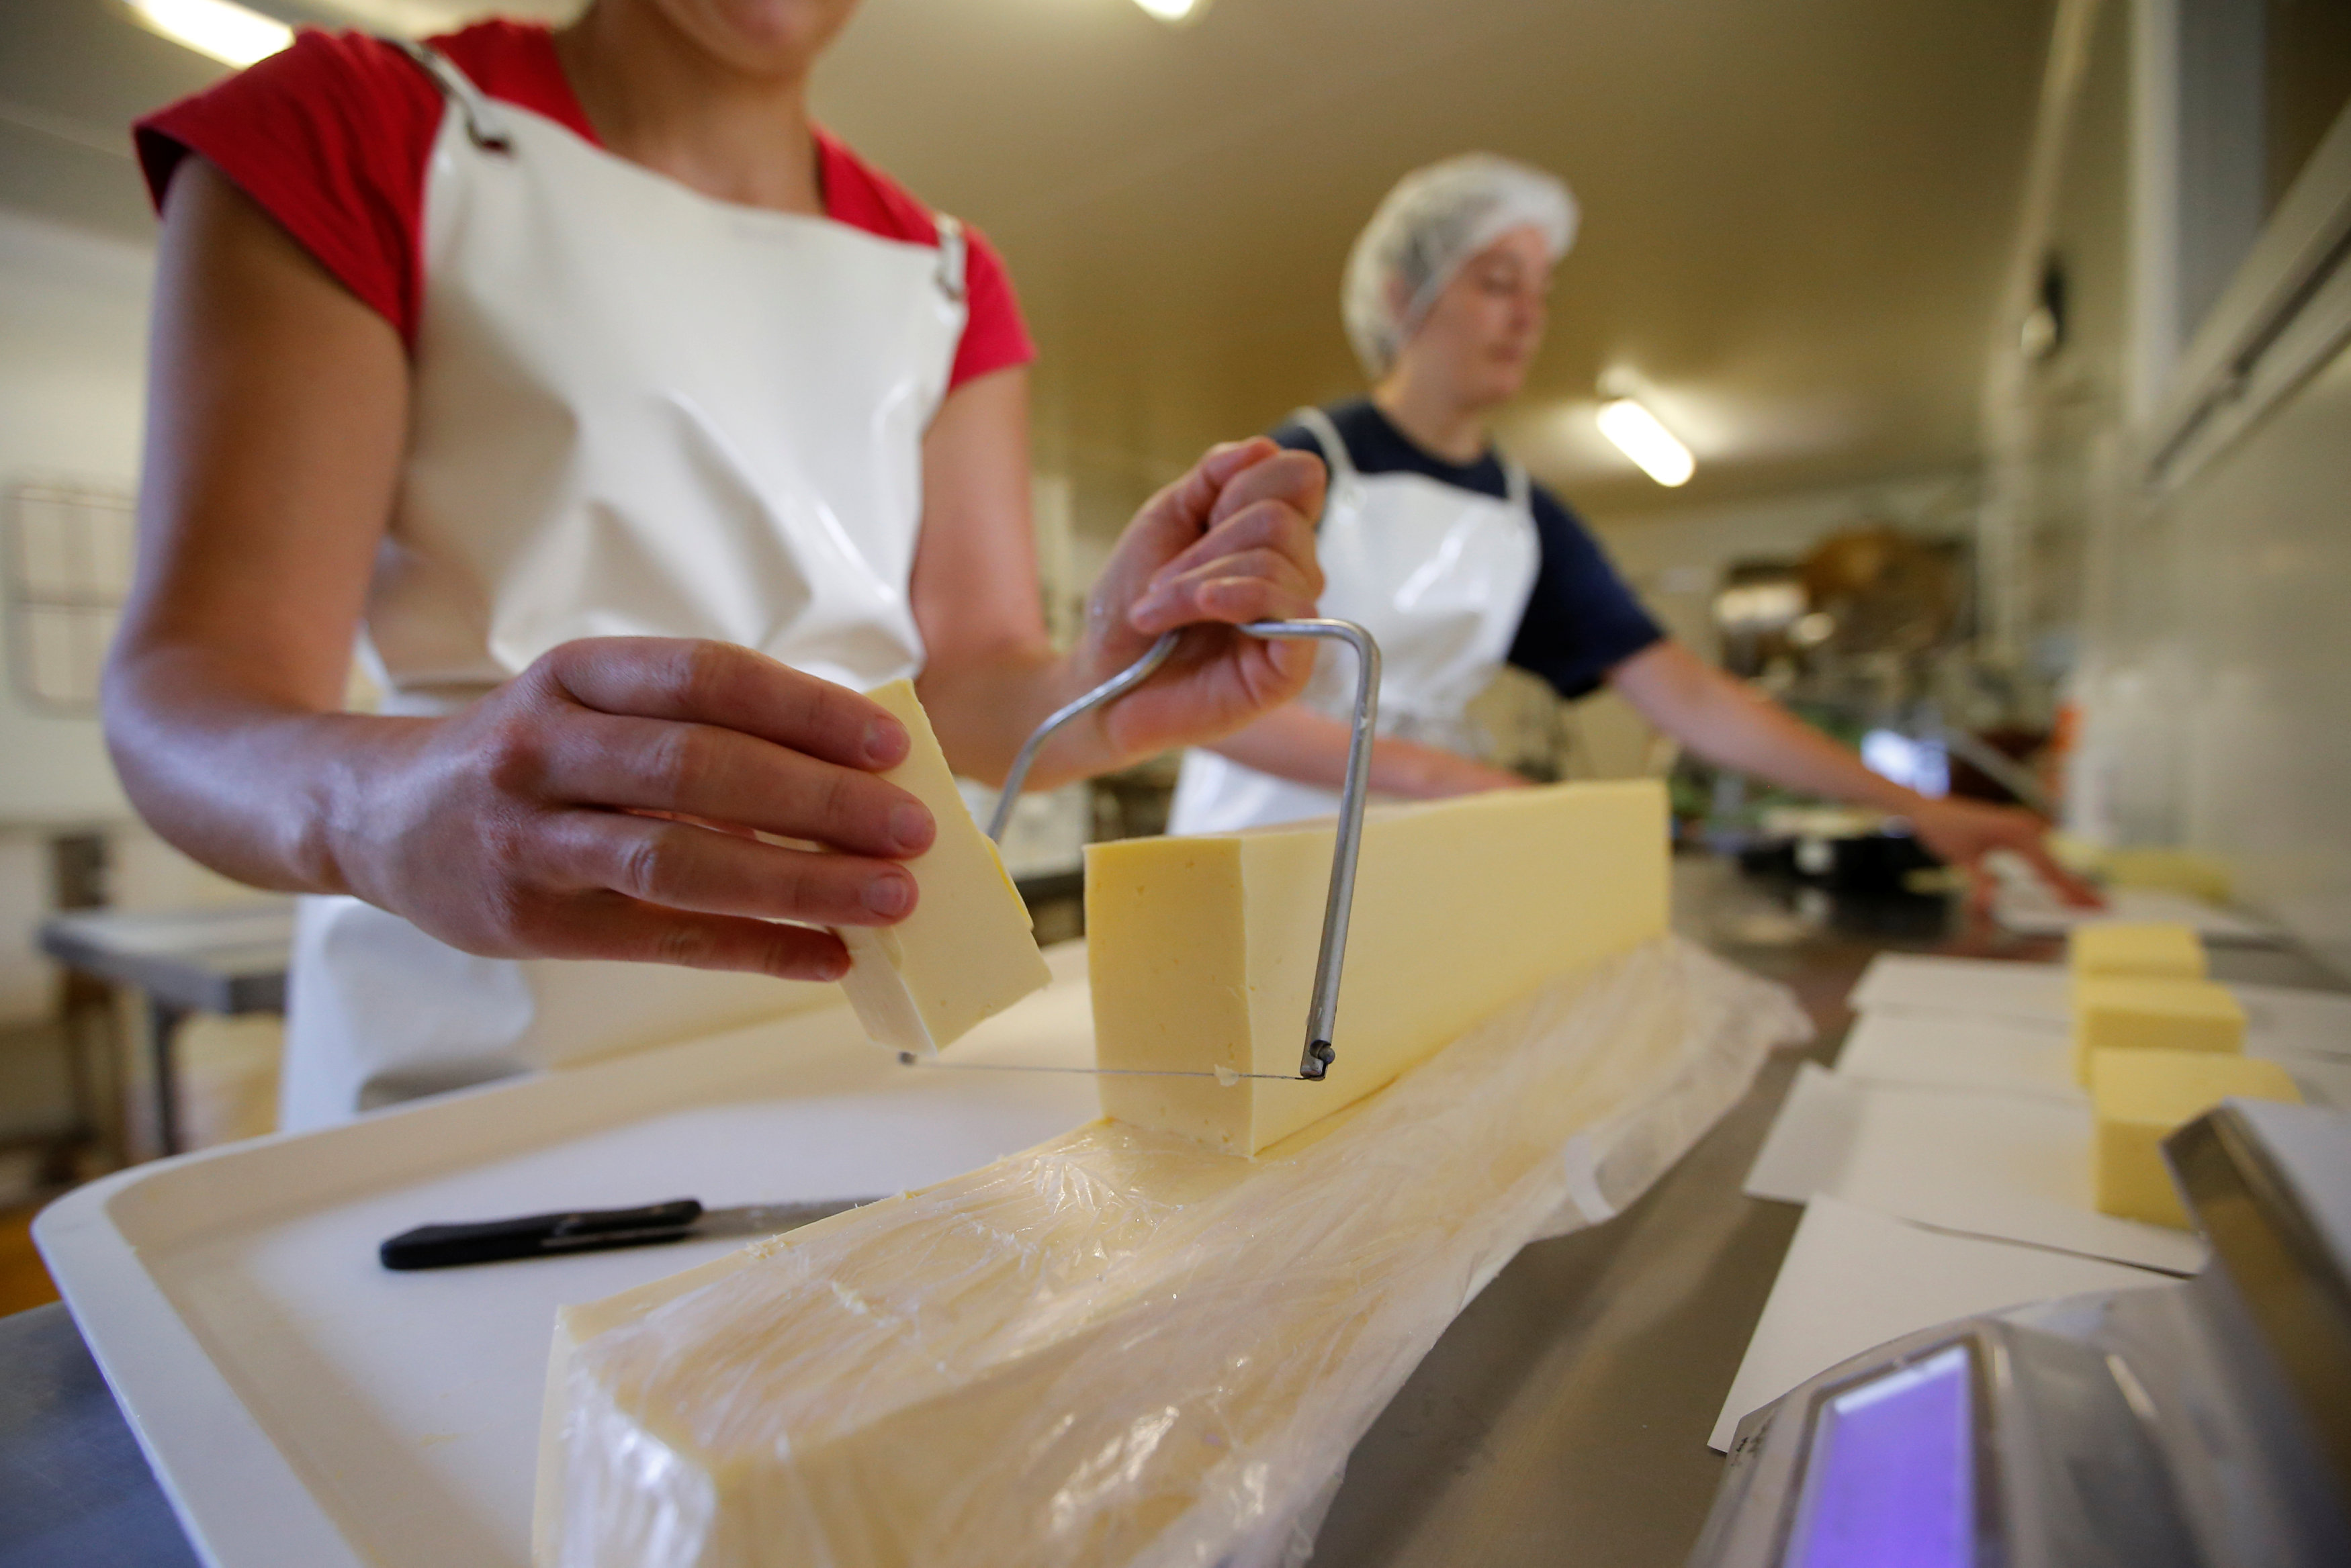 In pictures: Preparation of organic unpasteurised butter at a France milk farm